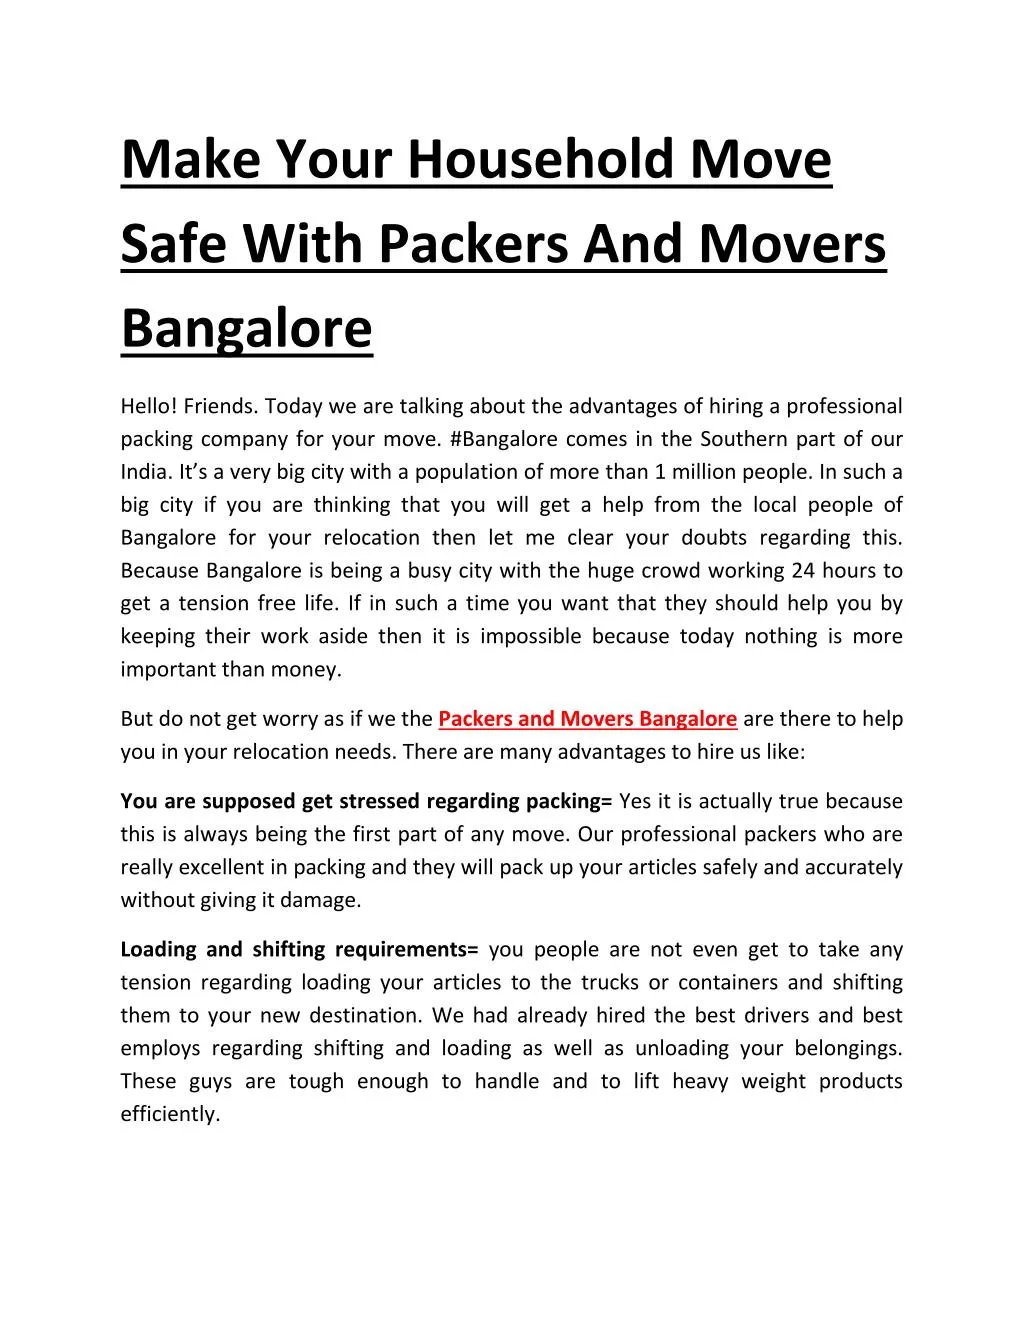 make your household move safe with packers